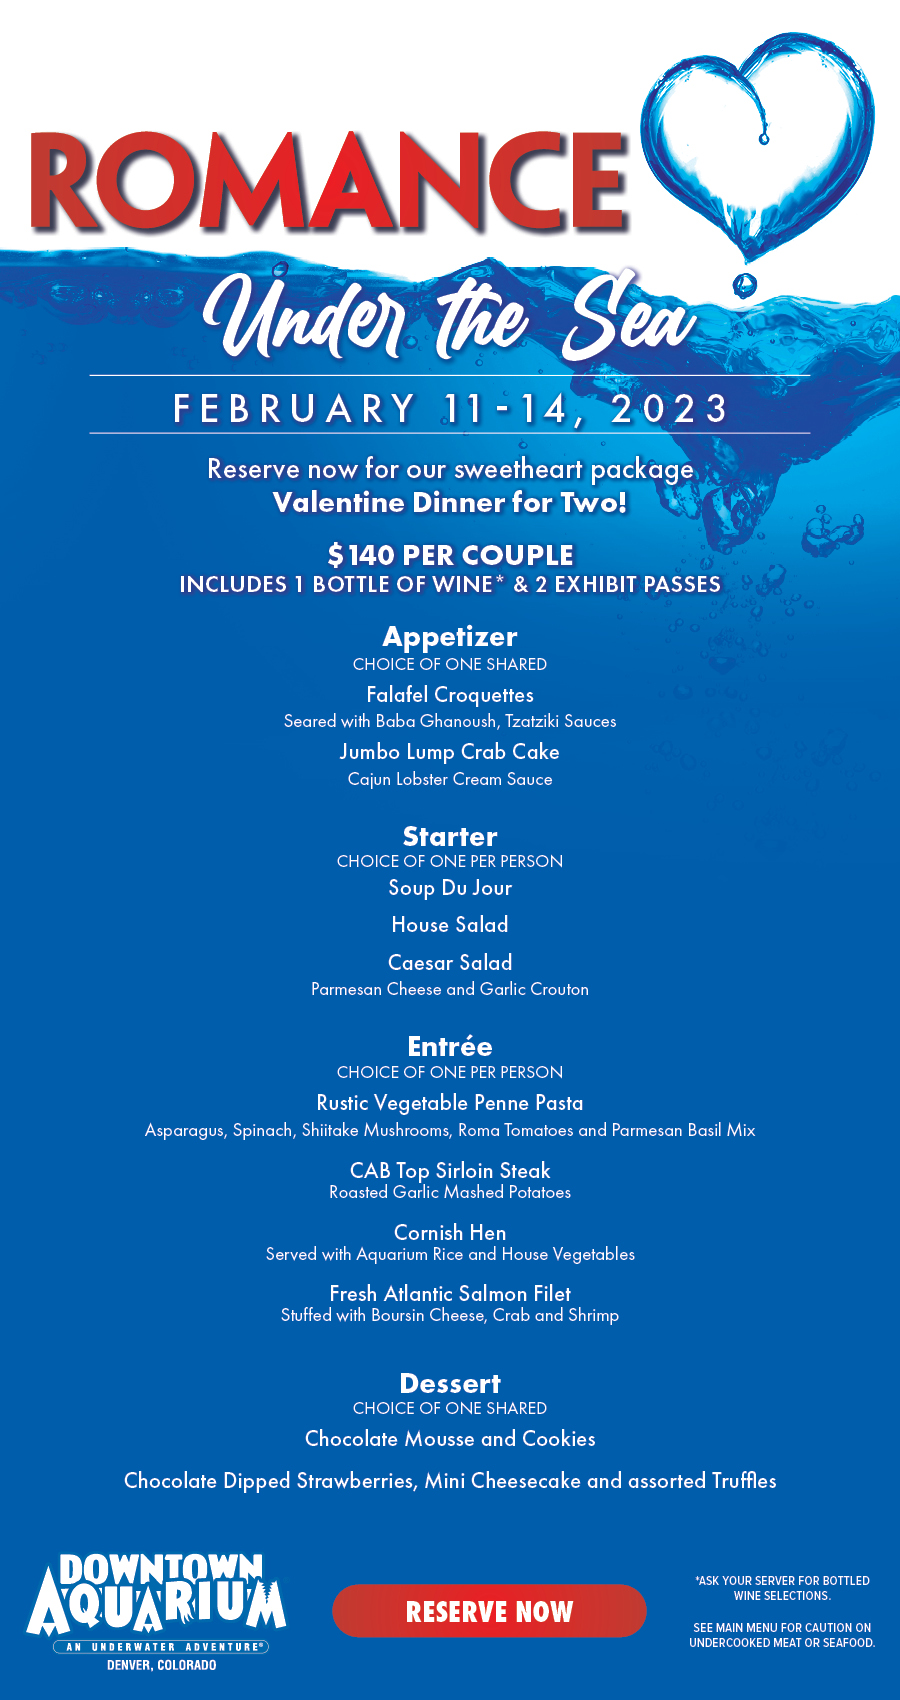 Downtown Aquarium - Romance Under The Sea - February 11th and 14th